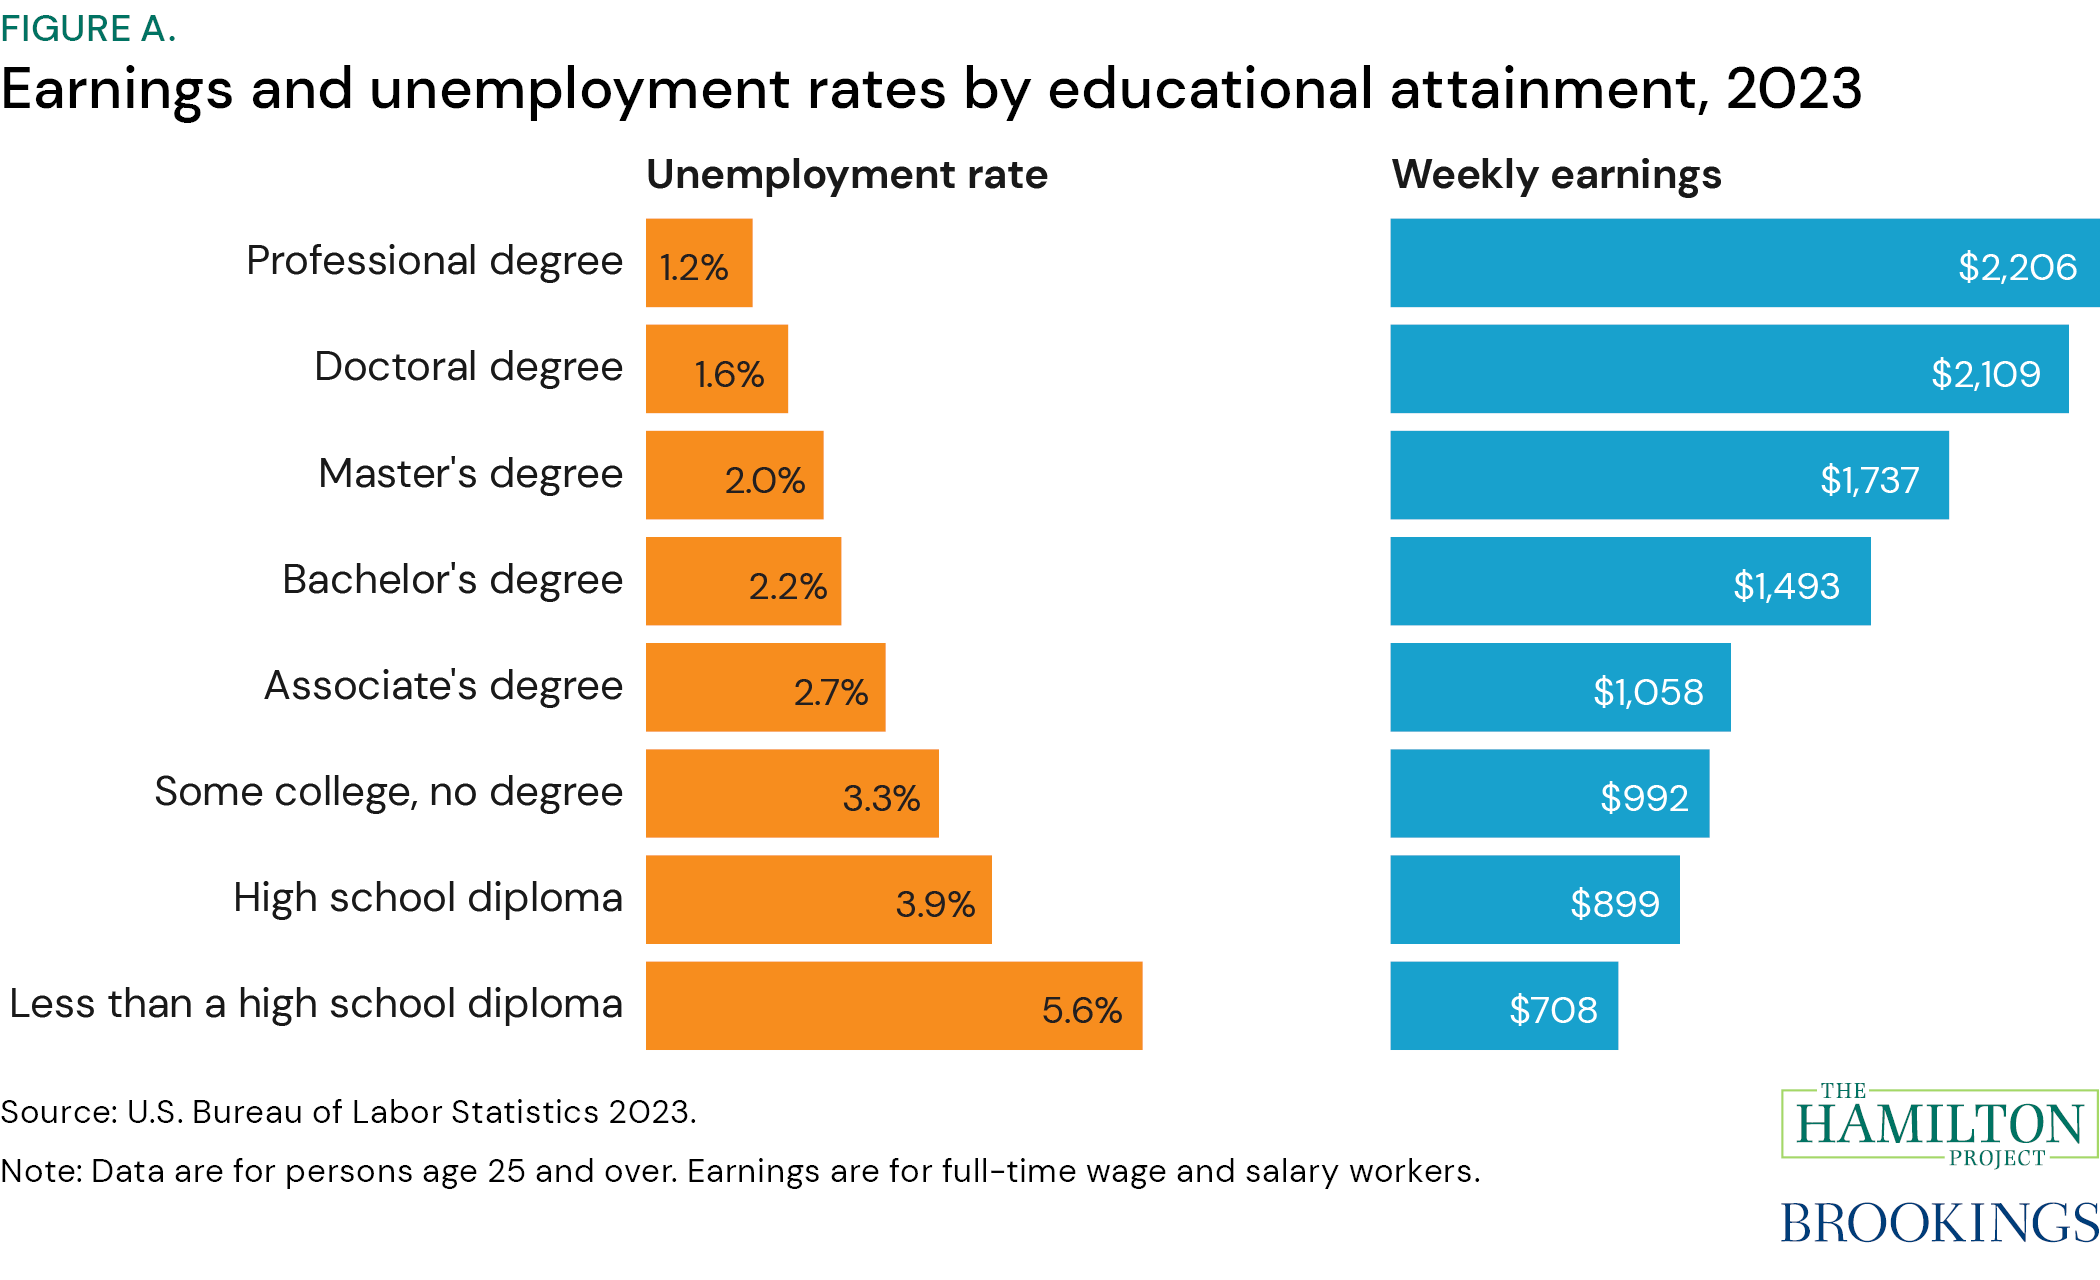 Figure A: Earnings and unemployment rates by educational attainment, 2023